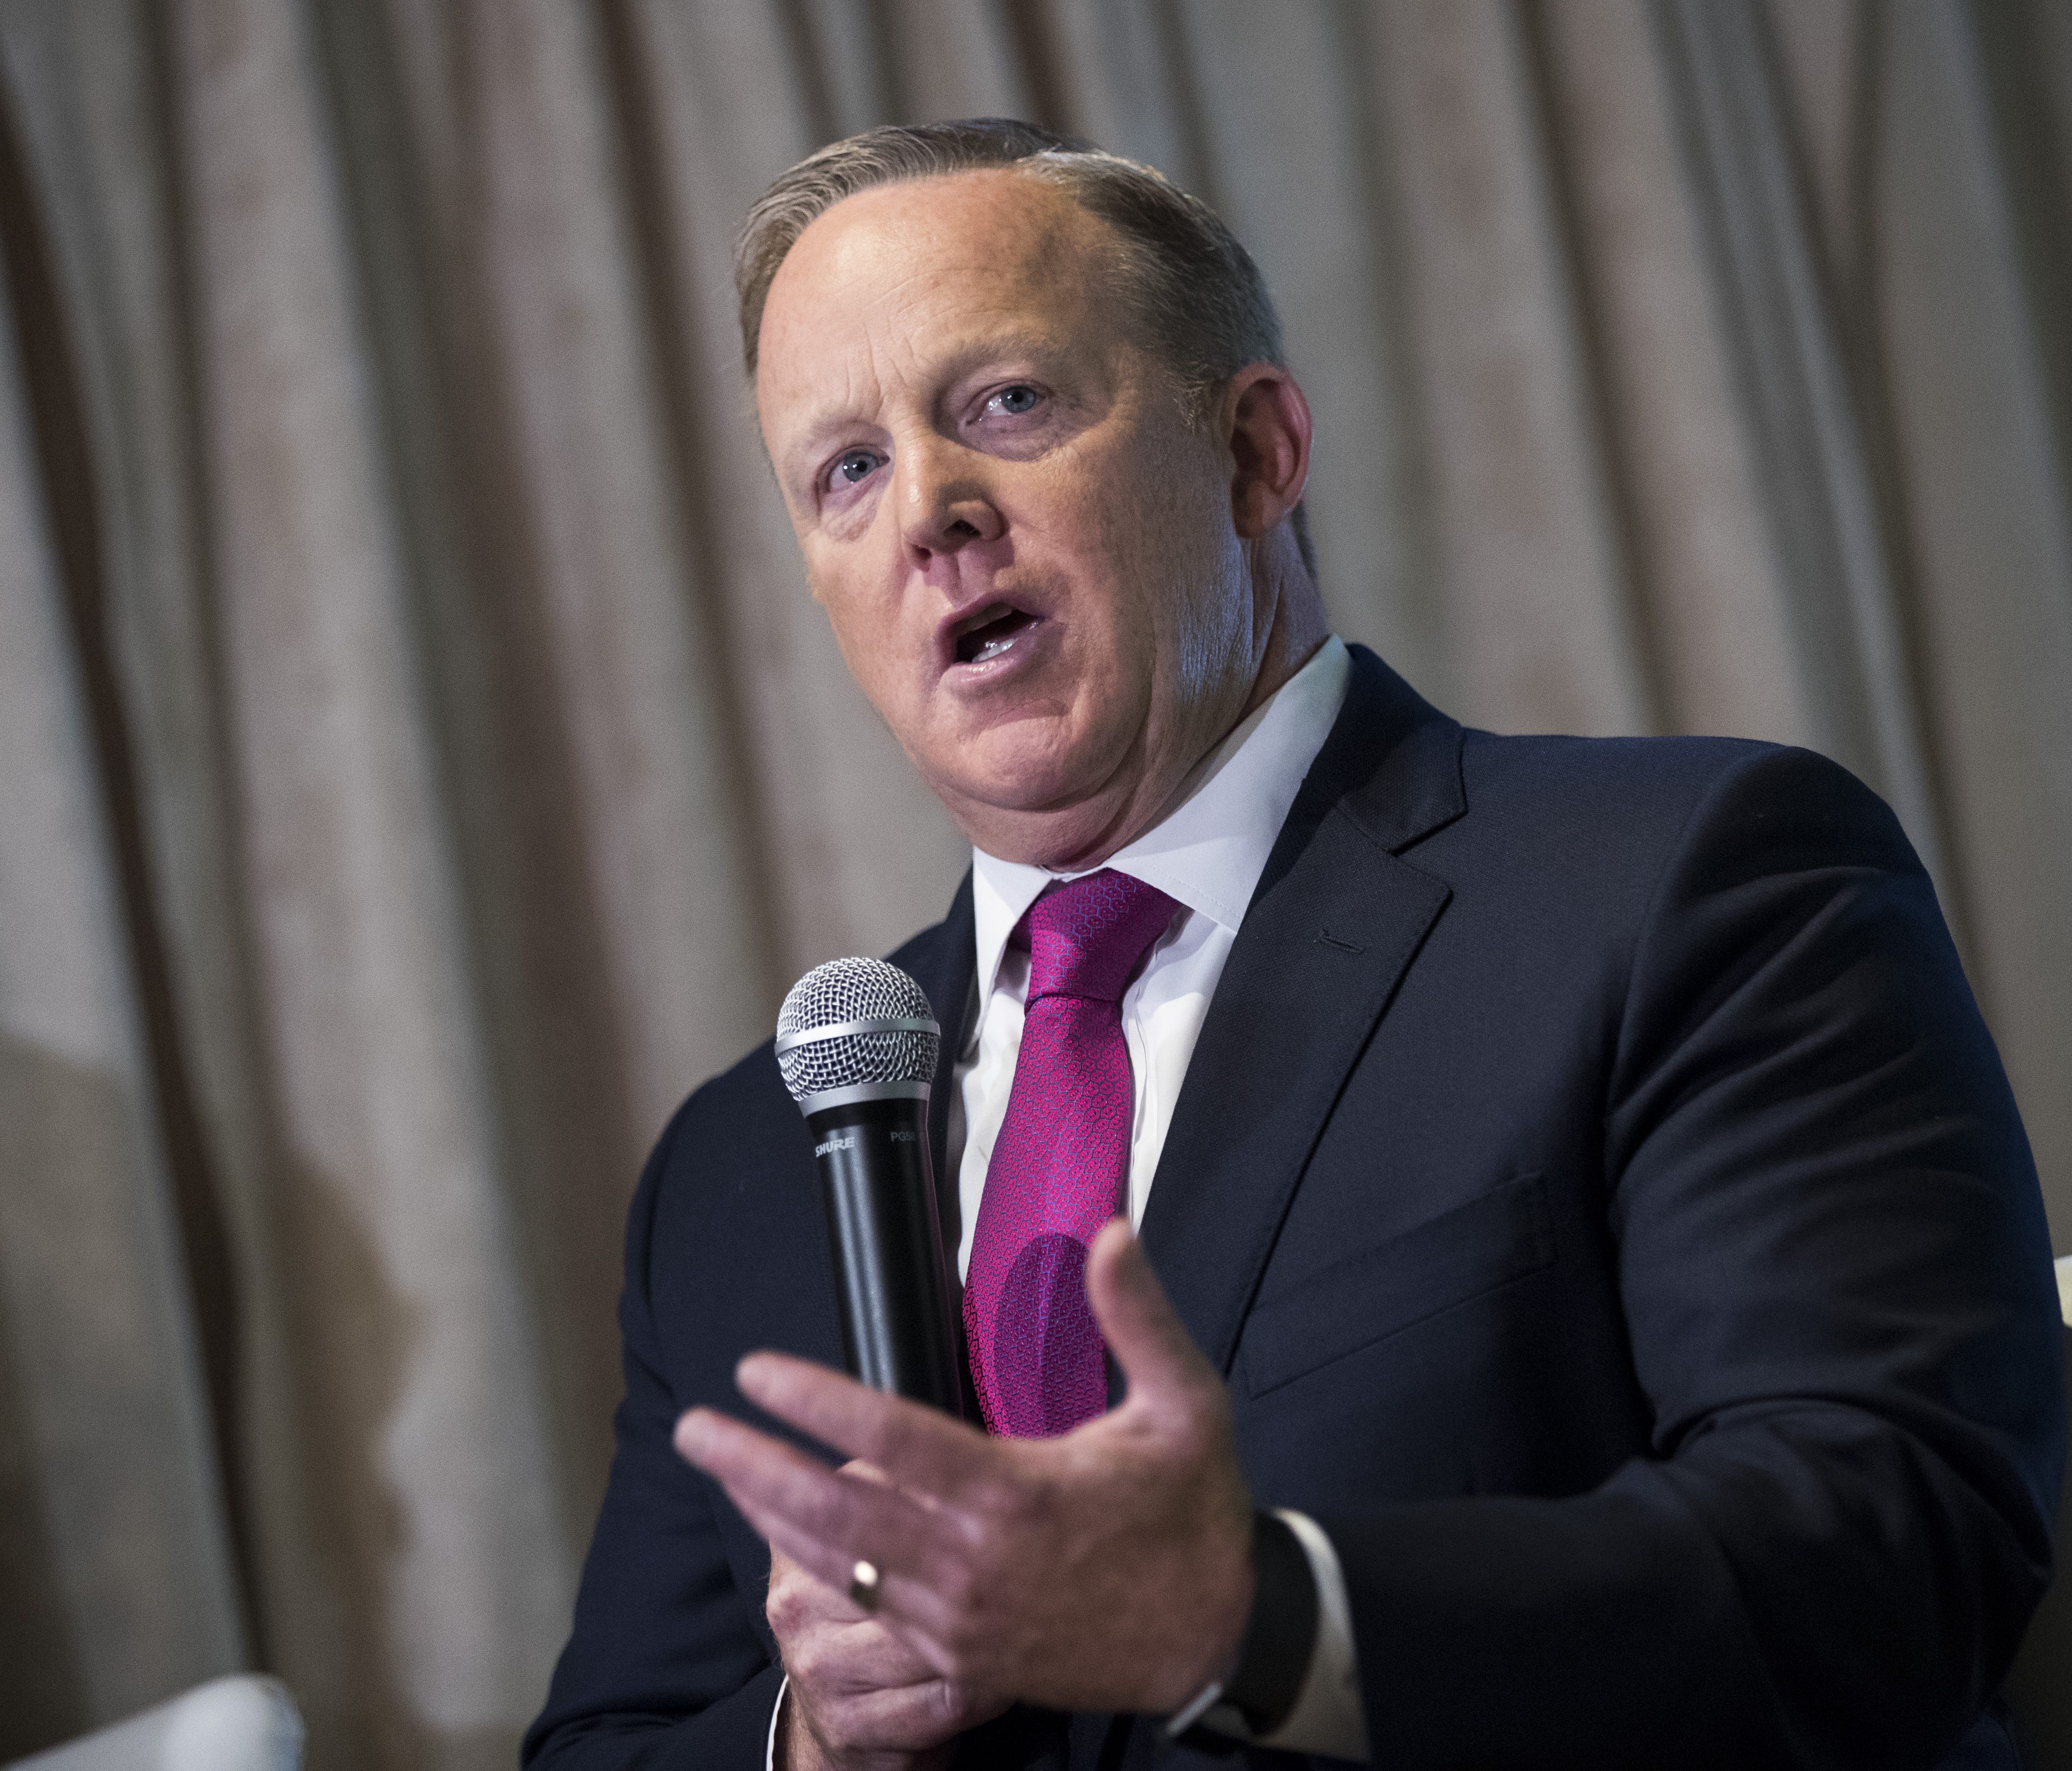 Former White House press secretary Sean Spicer answers a few questions from the press at Madame Tussauds wax museum, April 25, 2018 in New York City.